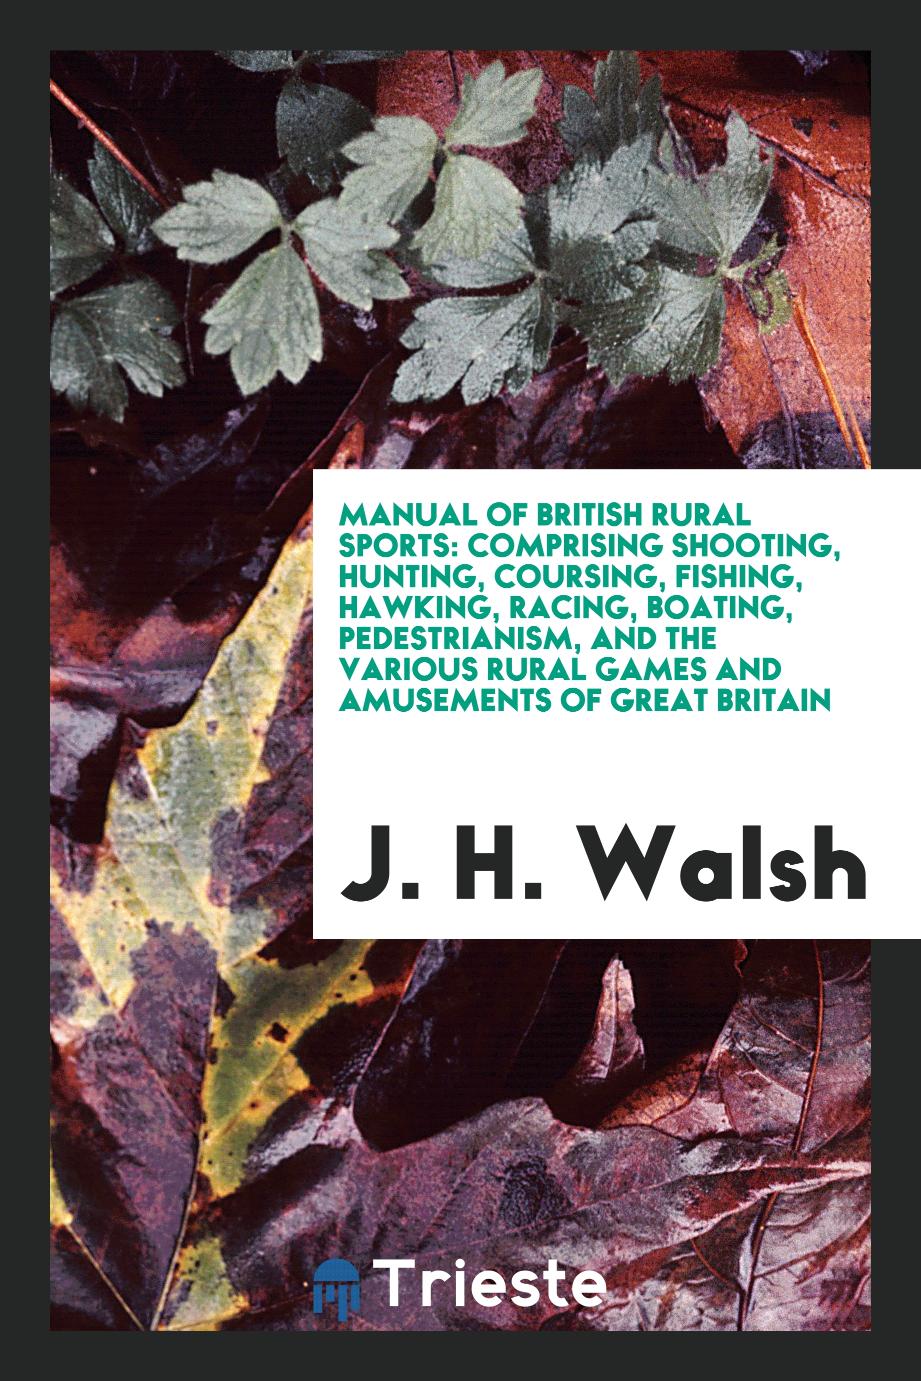 Manual of British Rural Sports: comprising shooting, hunting, coursing, fishing, hawking, racing, boating, pedestrianism, and the various rural games and amusements of Great Britain